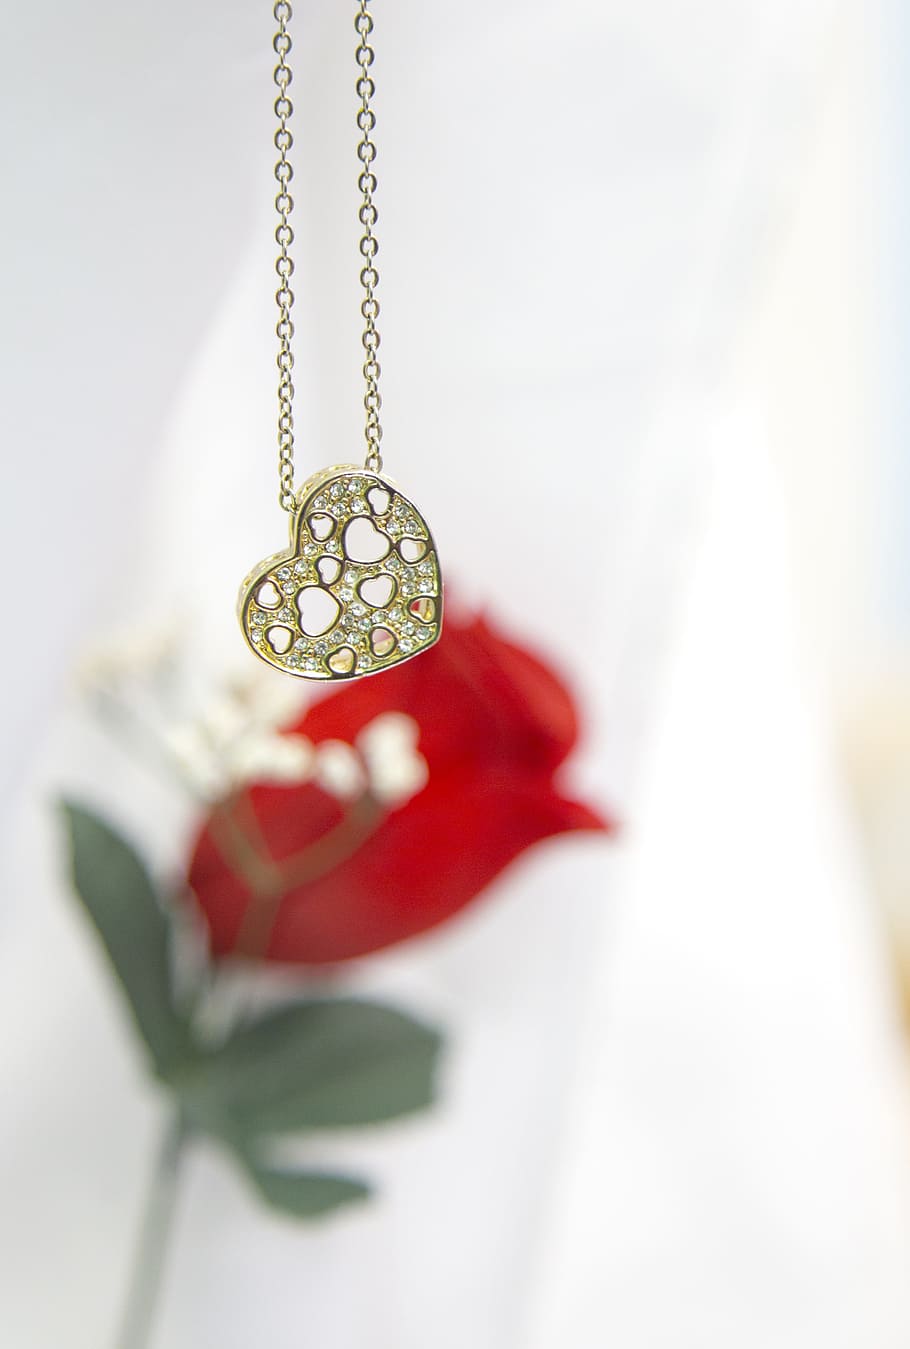 flower, heart, gold, jewelry, red, close-up, necklace, gold colored, hanging, locket